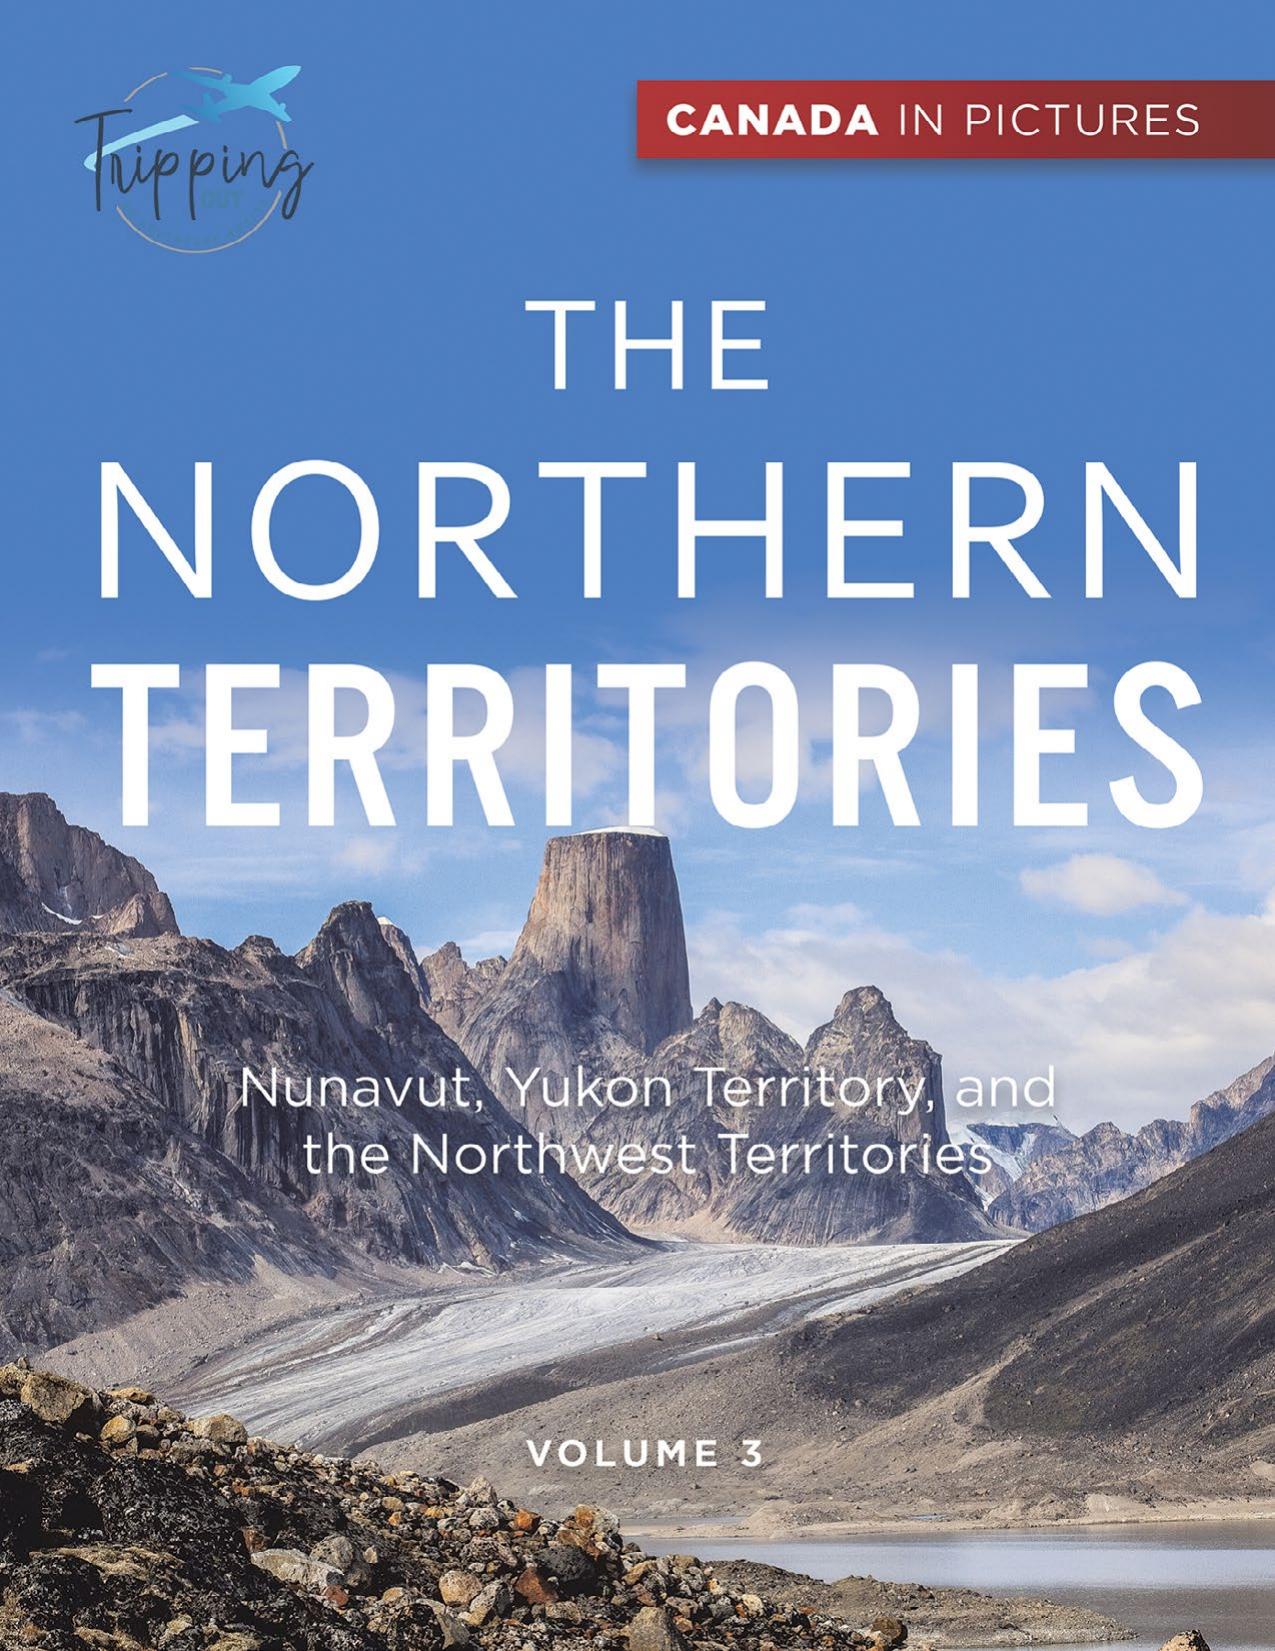 Canada In Pictures--The Northern Territories--Volume 3--Nunavut, Yukon Territory, and the Northwest Territories by Tripping Out